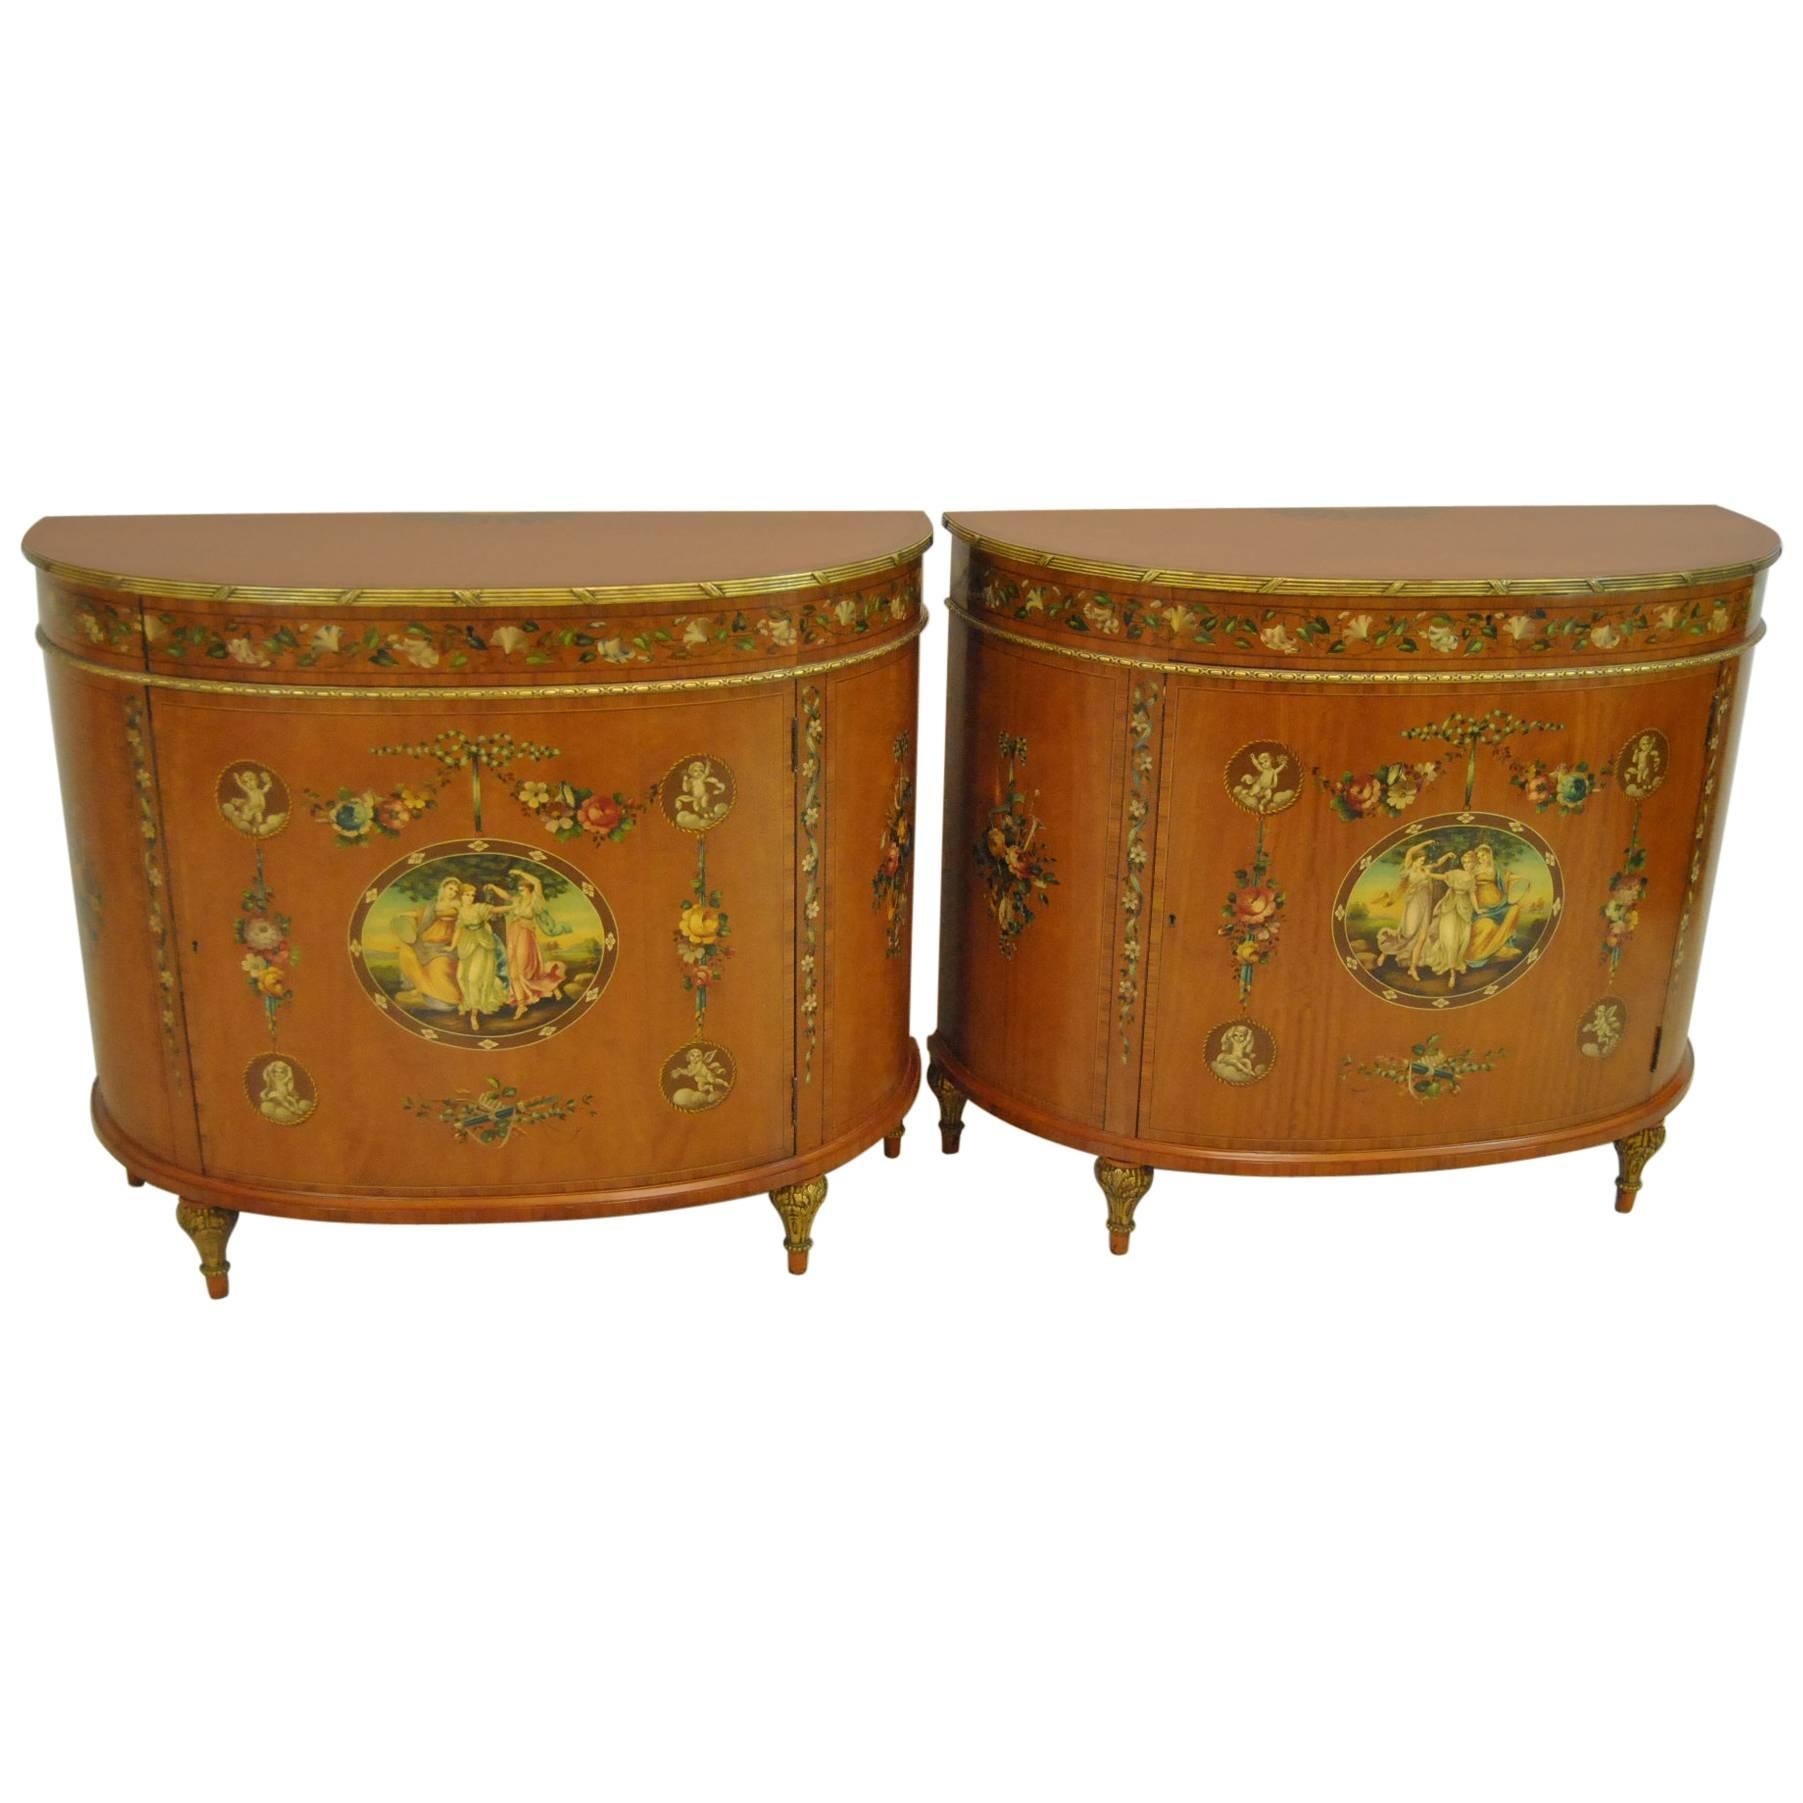 Pair of French Adam Style Commodes by Irwin Furniture Dated 1937